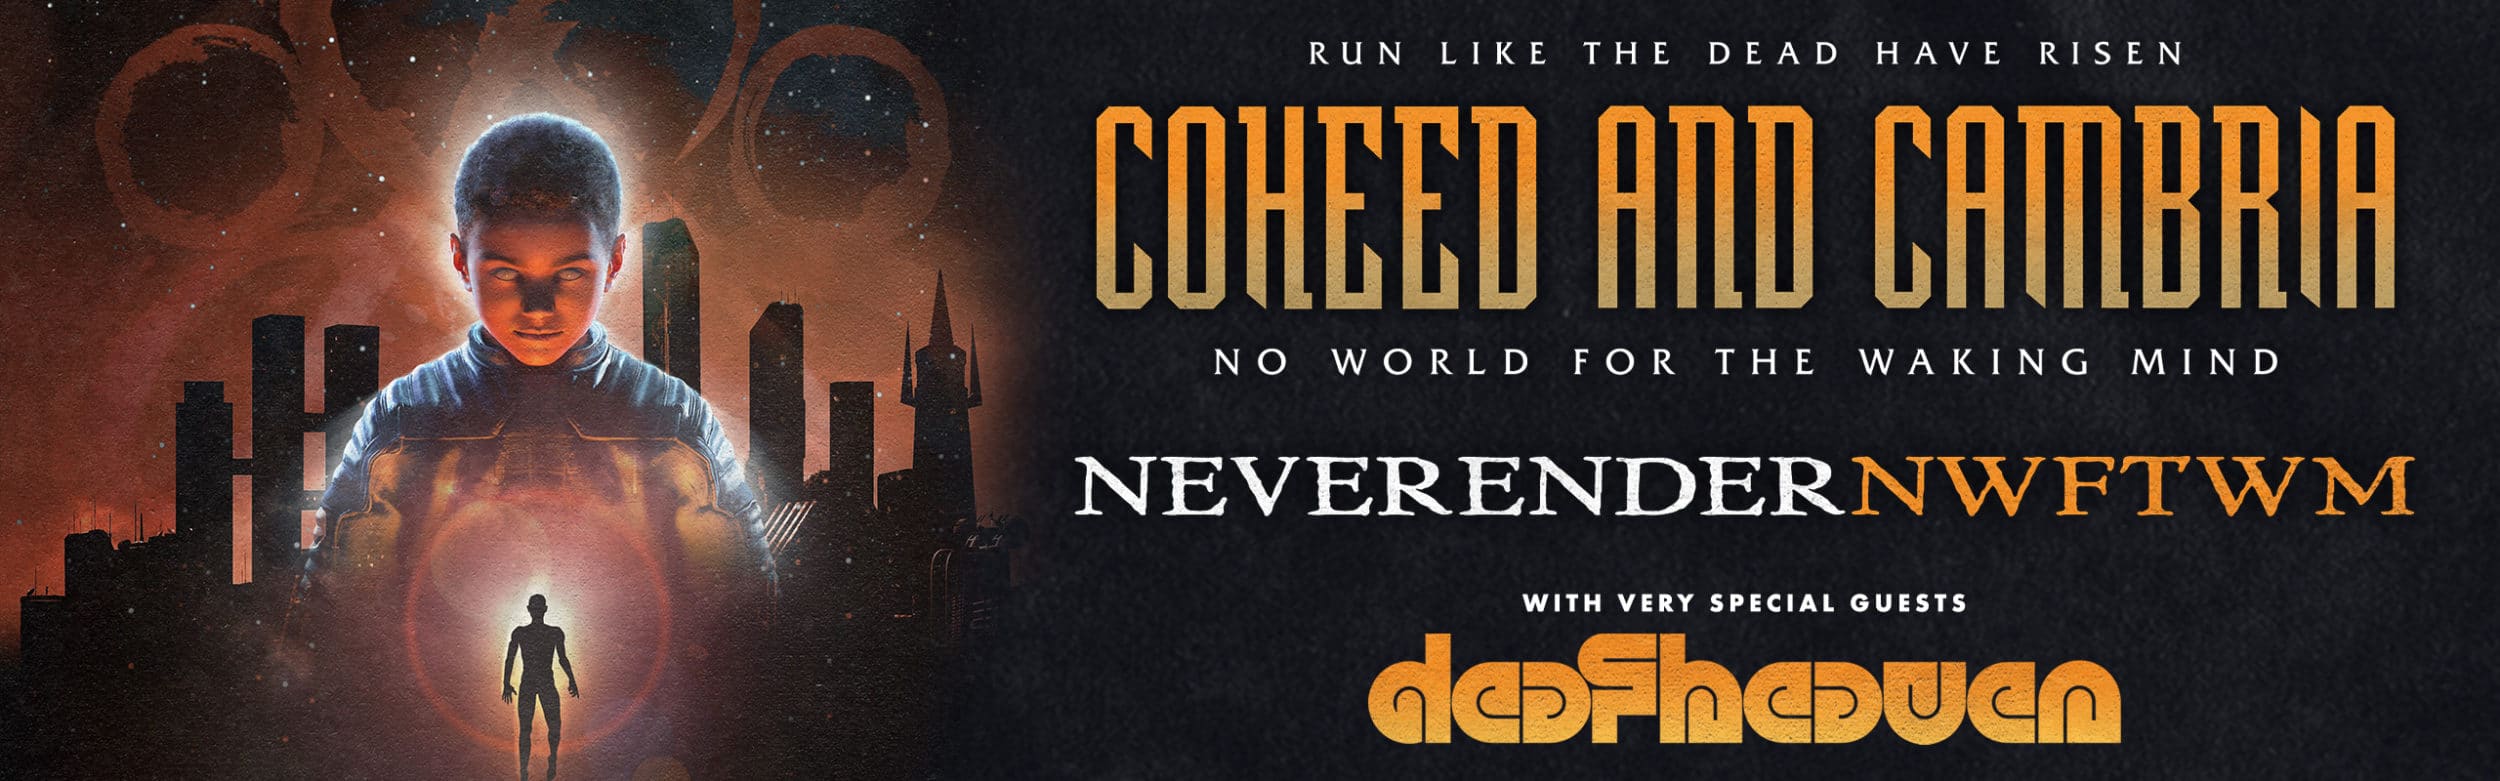 Coheed and Cambria “NEVERENDER NWFTWM”